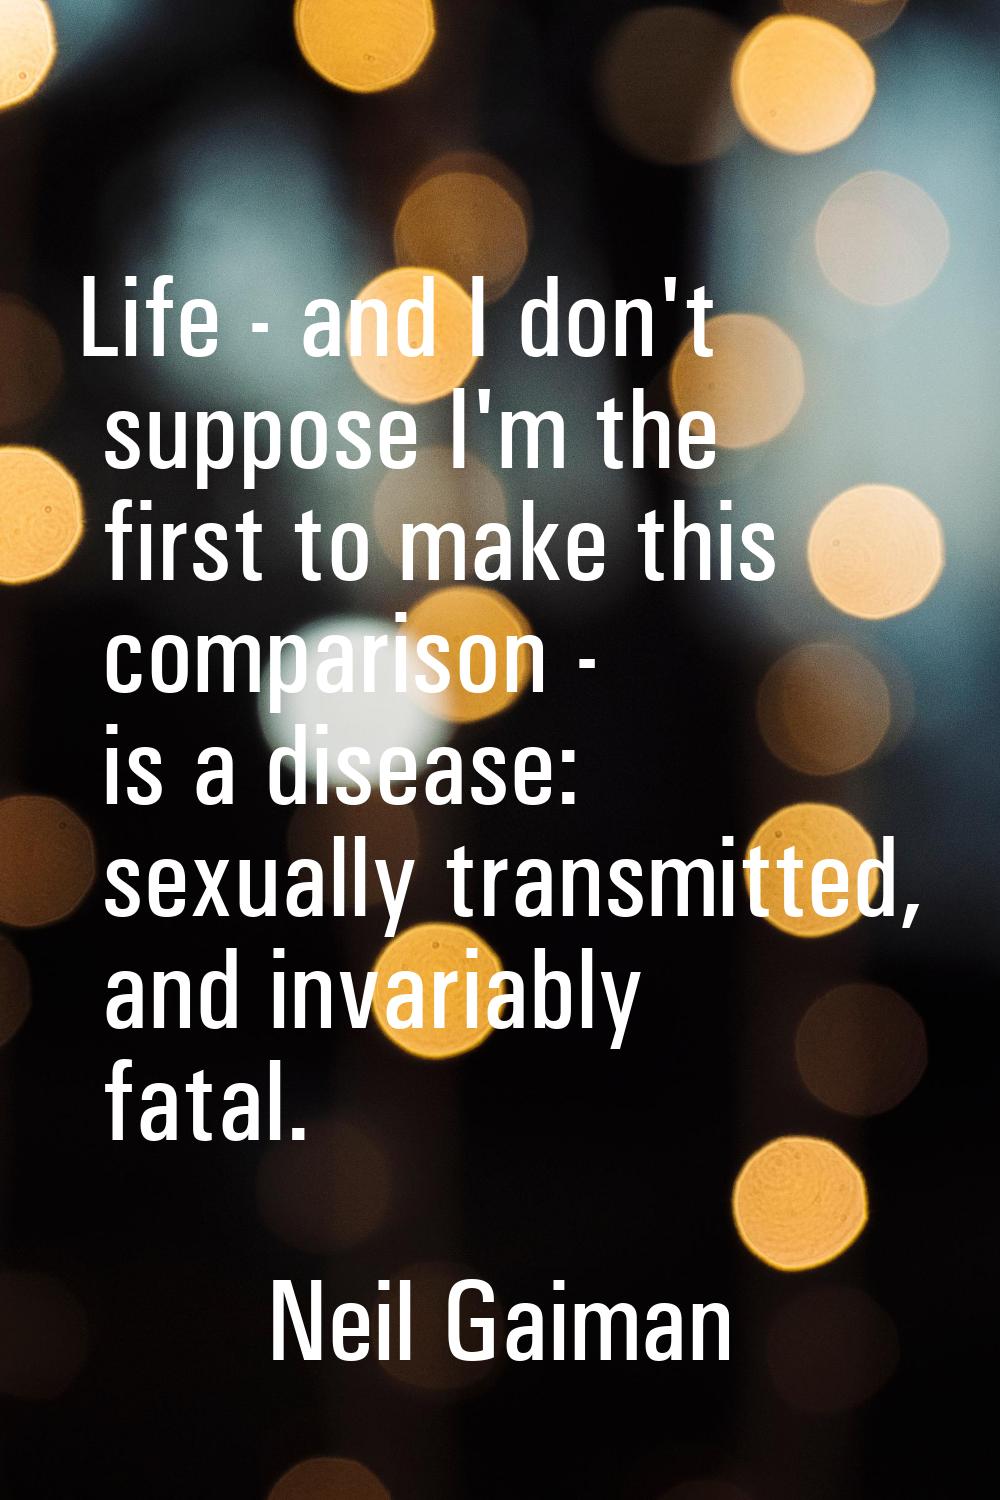 Life - and I don't suppose I'm the first to make this comparison - is a disease: sexually transmitt